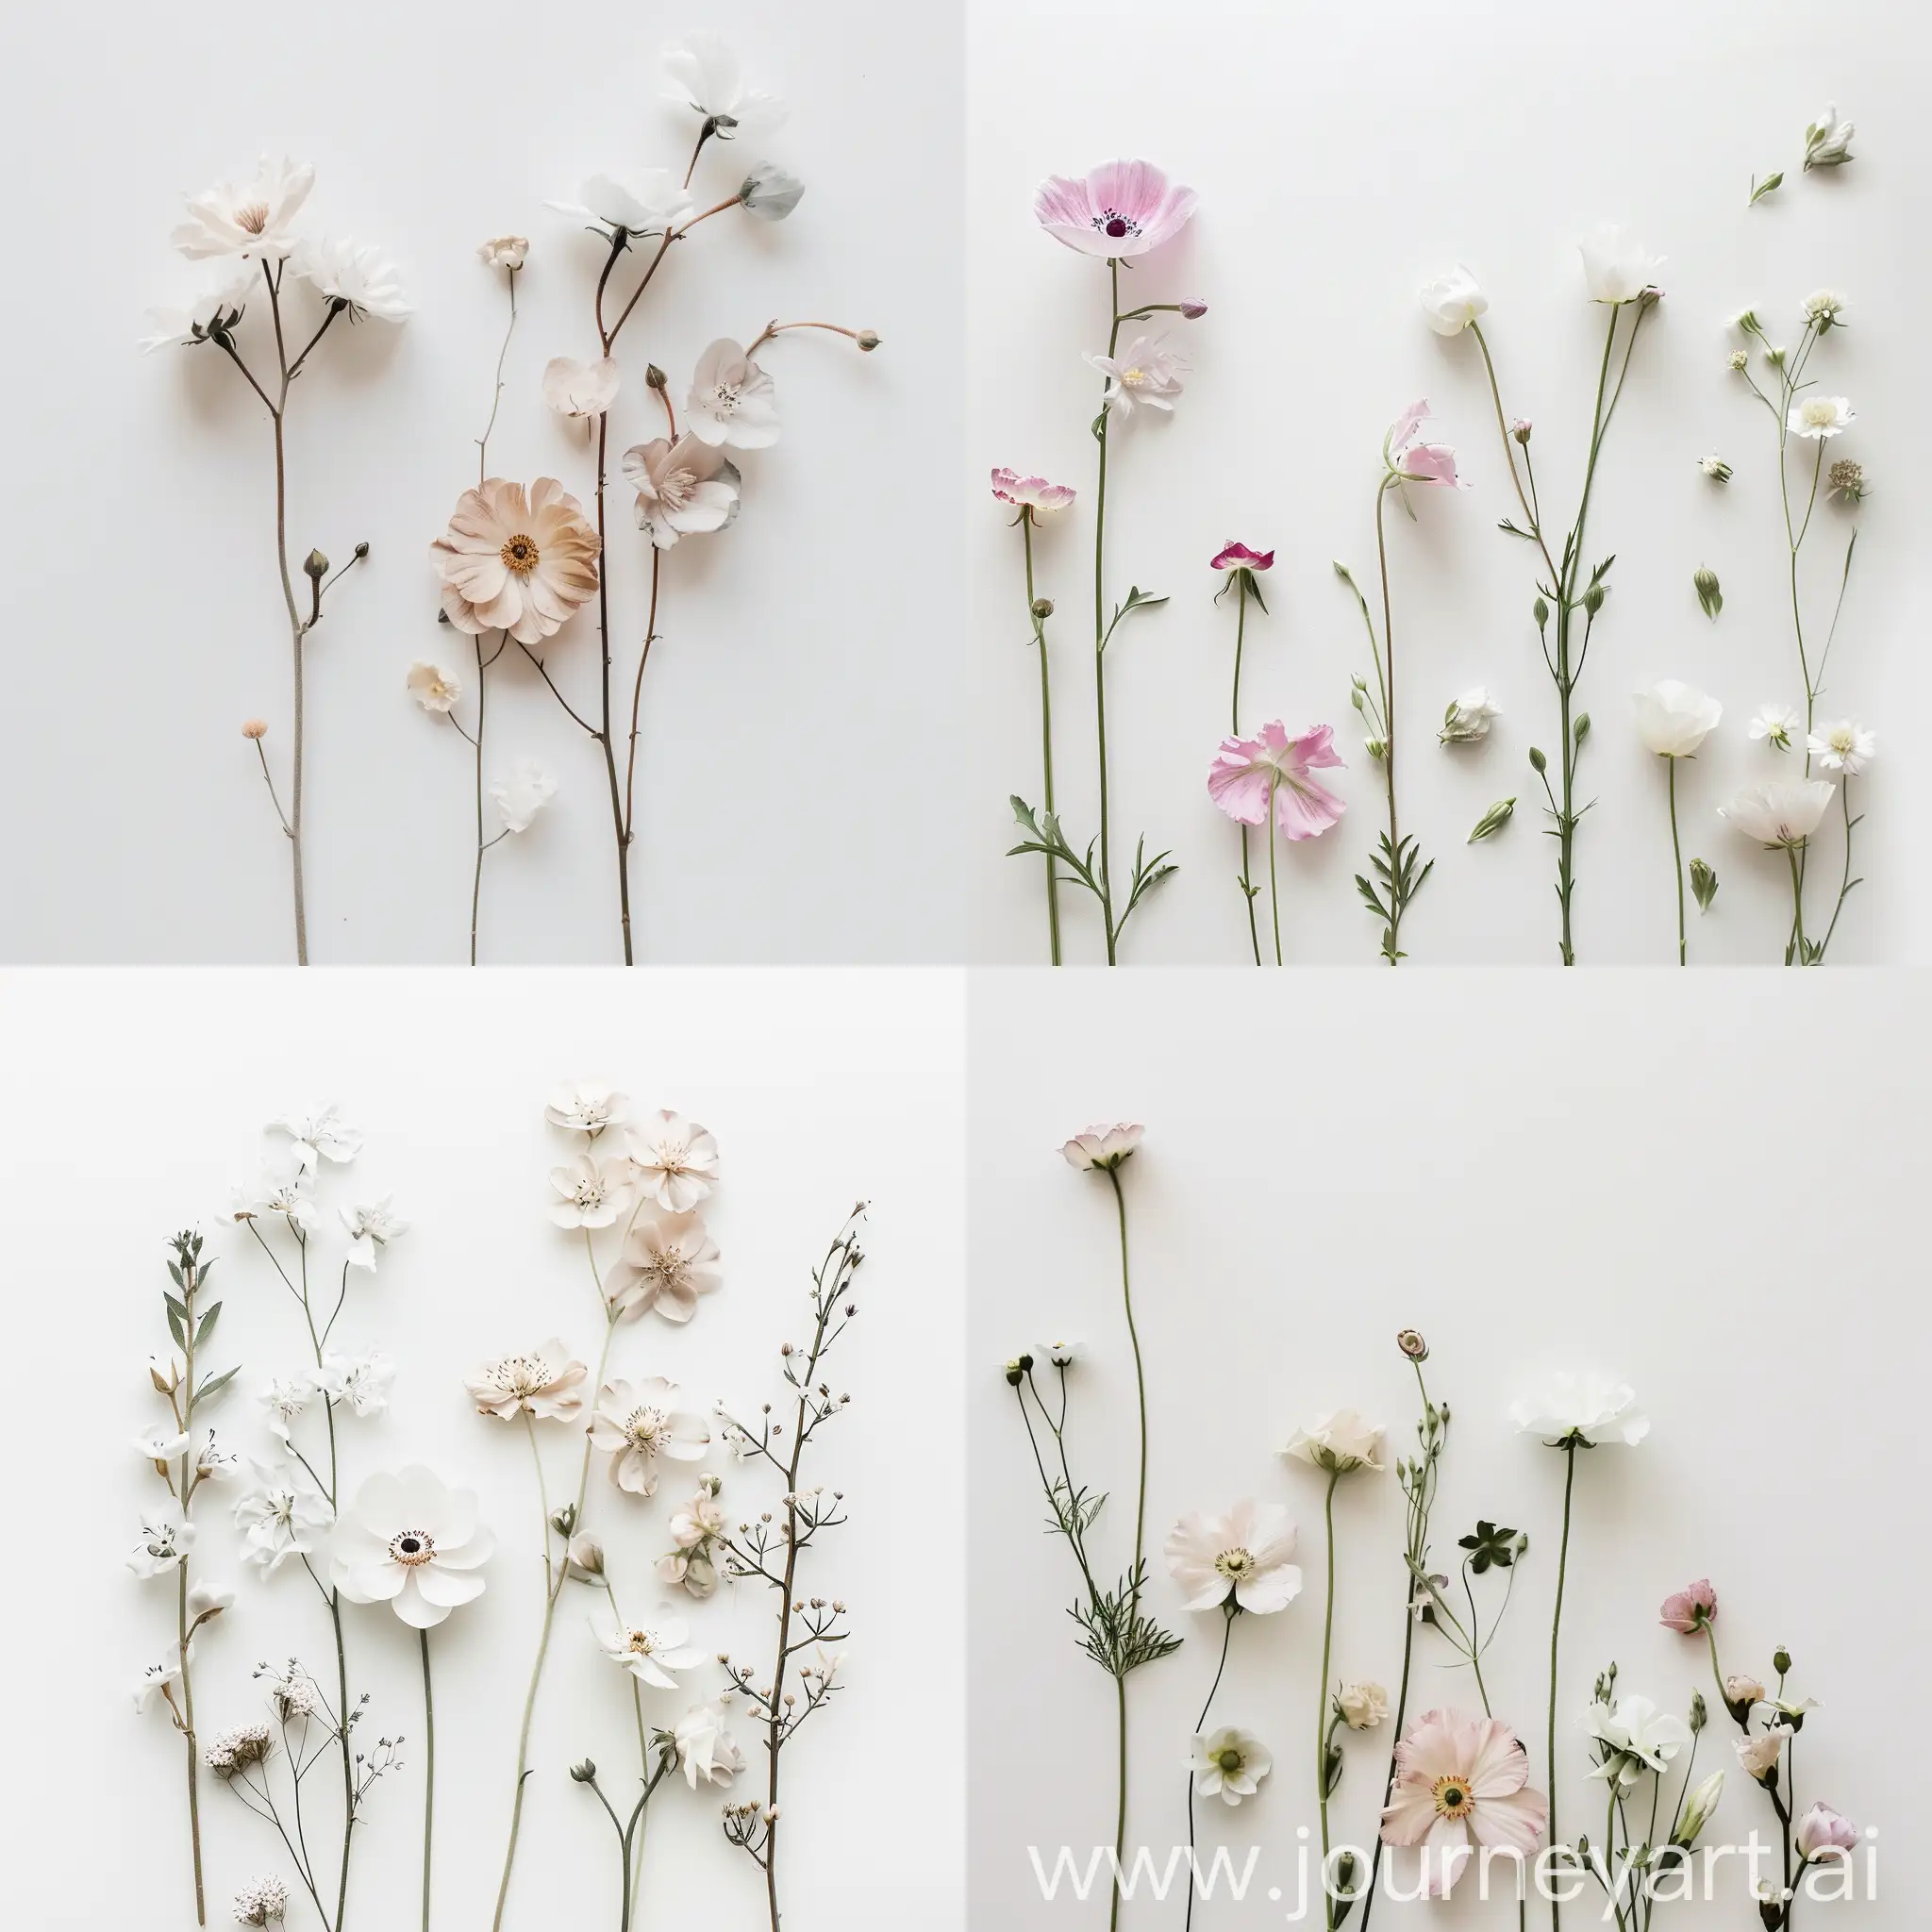 Delicate-Flowers-Arrangement-on-White-Background